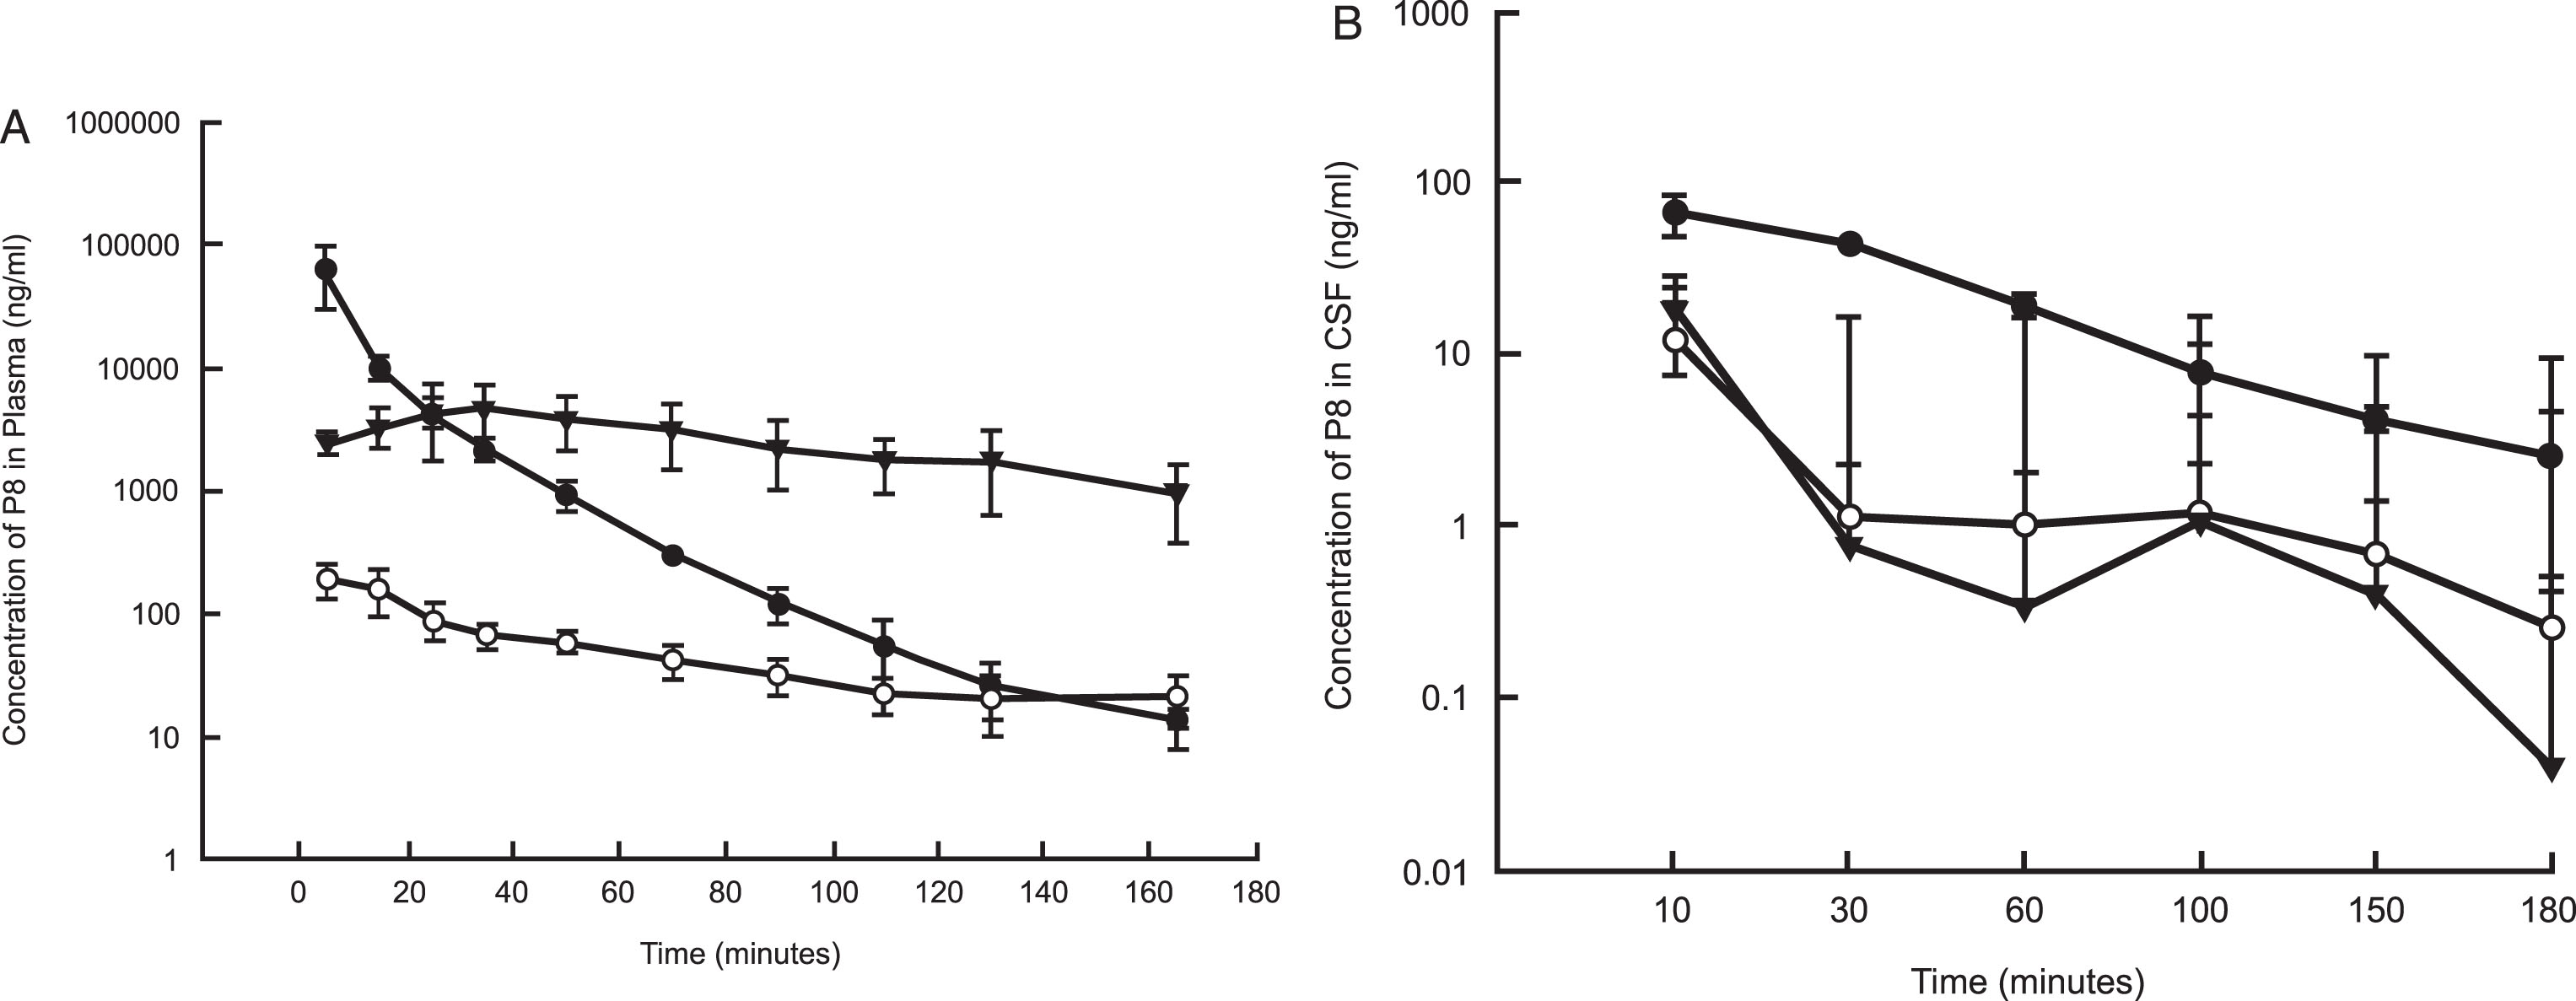 Mean (±SD) concentrations (ng/ml) of P8 in plasma (A) and CSF (B) of rats following a single IV, IN, or SC dose administration. P8 in PBS (11 mg/kg for IV and SC and 5.5 mg/kg for IN) was delivered to rats (n = 6 per dose group). Blood and CSF samples were removed for up to 180 mins from the onset of administration and analyzed by HPLC as described. PK analysis was performed using standard non-compartmental analysis models in Phoenix WinNonlin (v. 6.3). Black circles: IV administration; Open circles: IN administration; Triangles: SC administration.